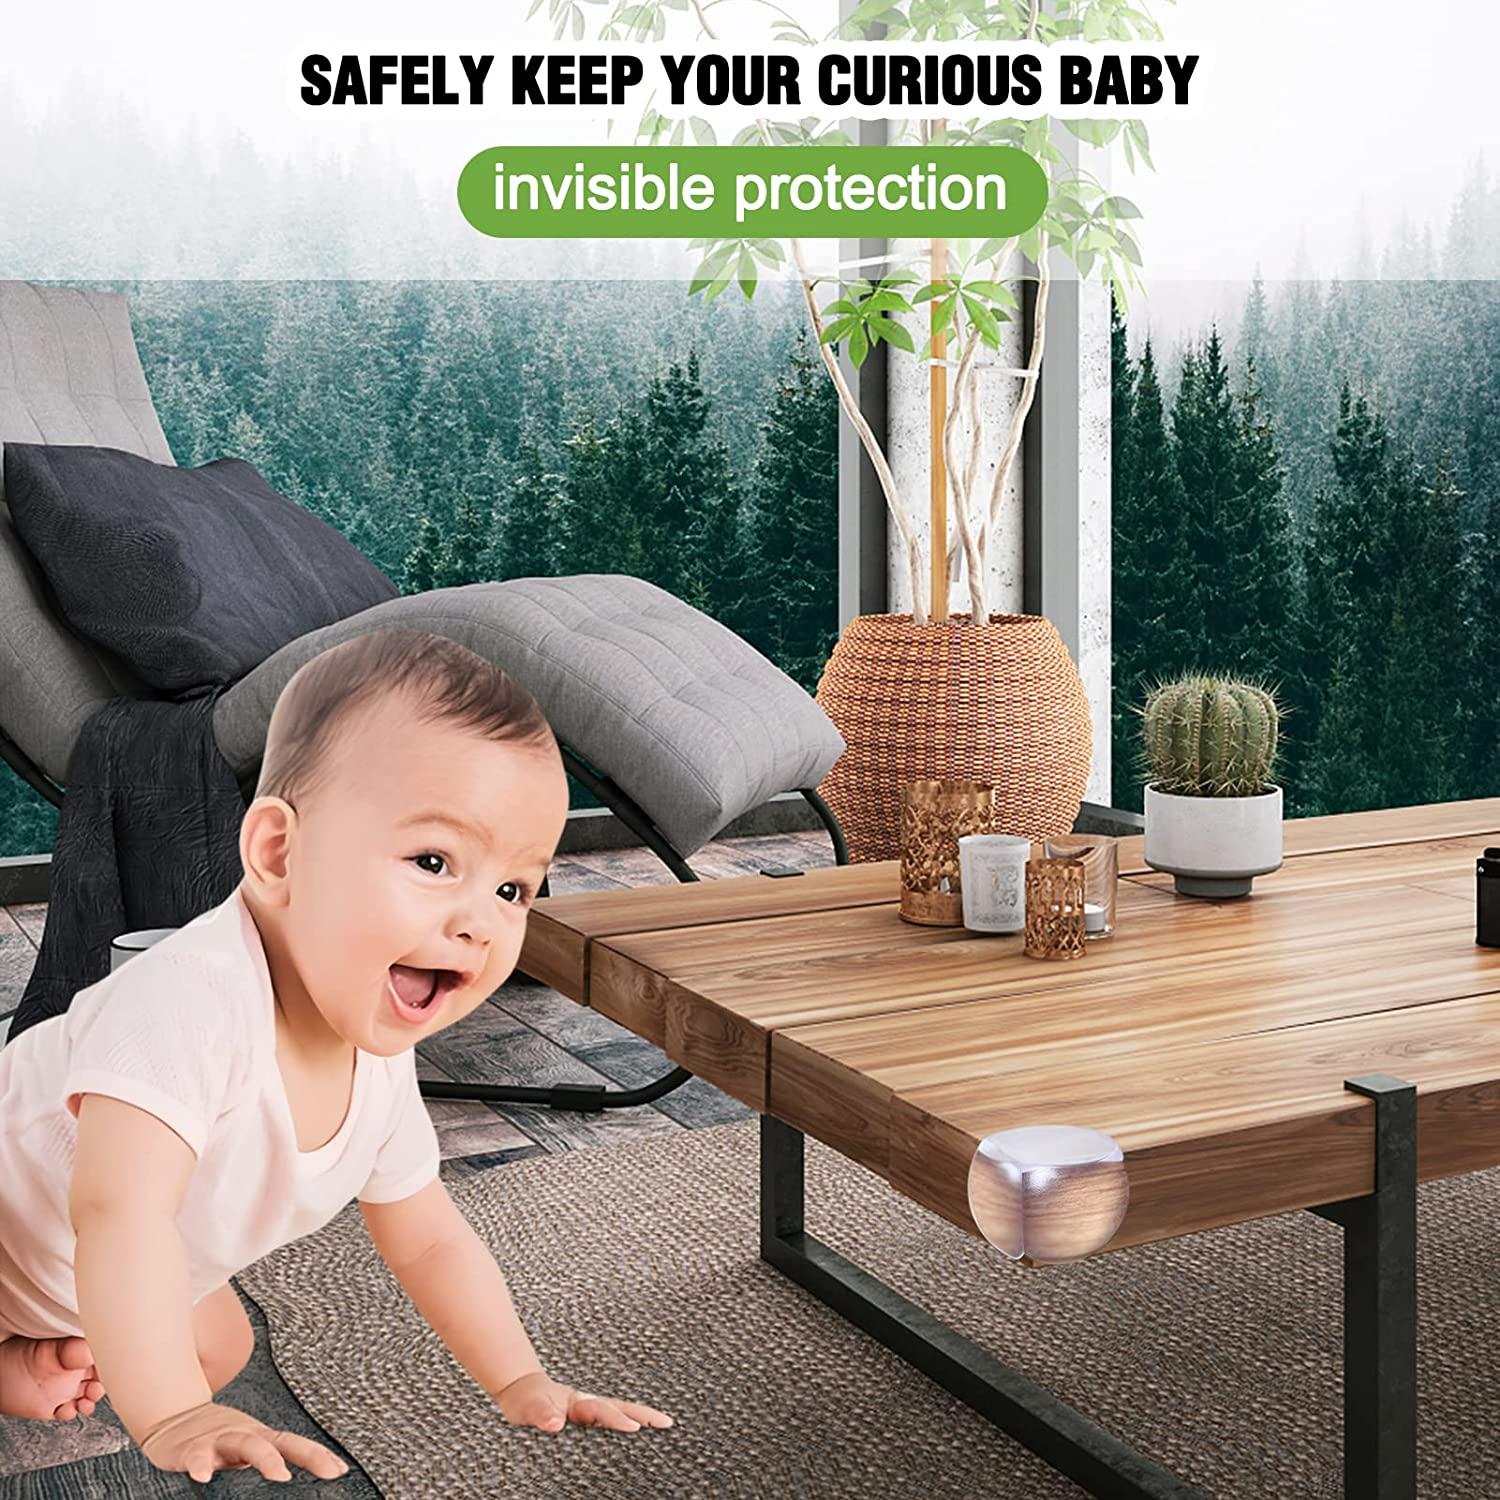 Corner Protector, Baby Proofing Table Corner Guards, Keep Child Safe,  Protectors